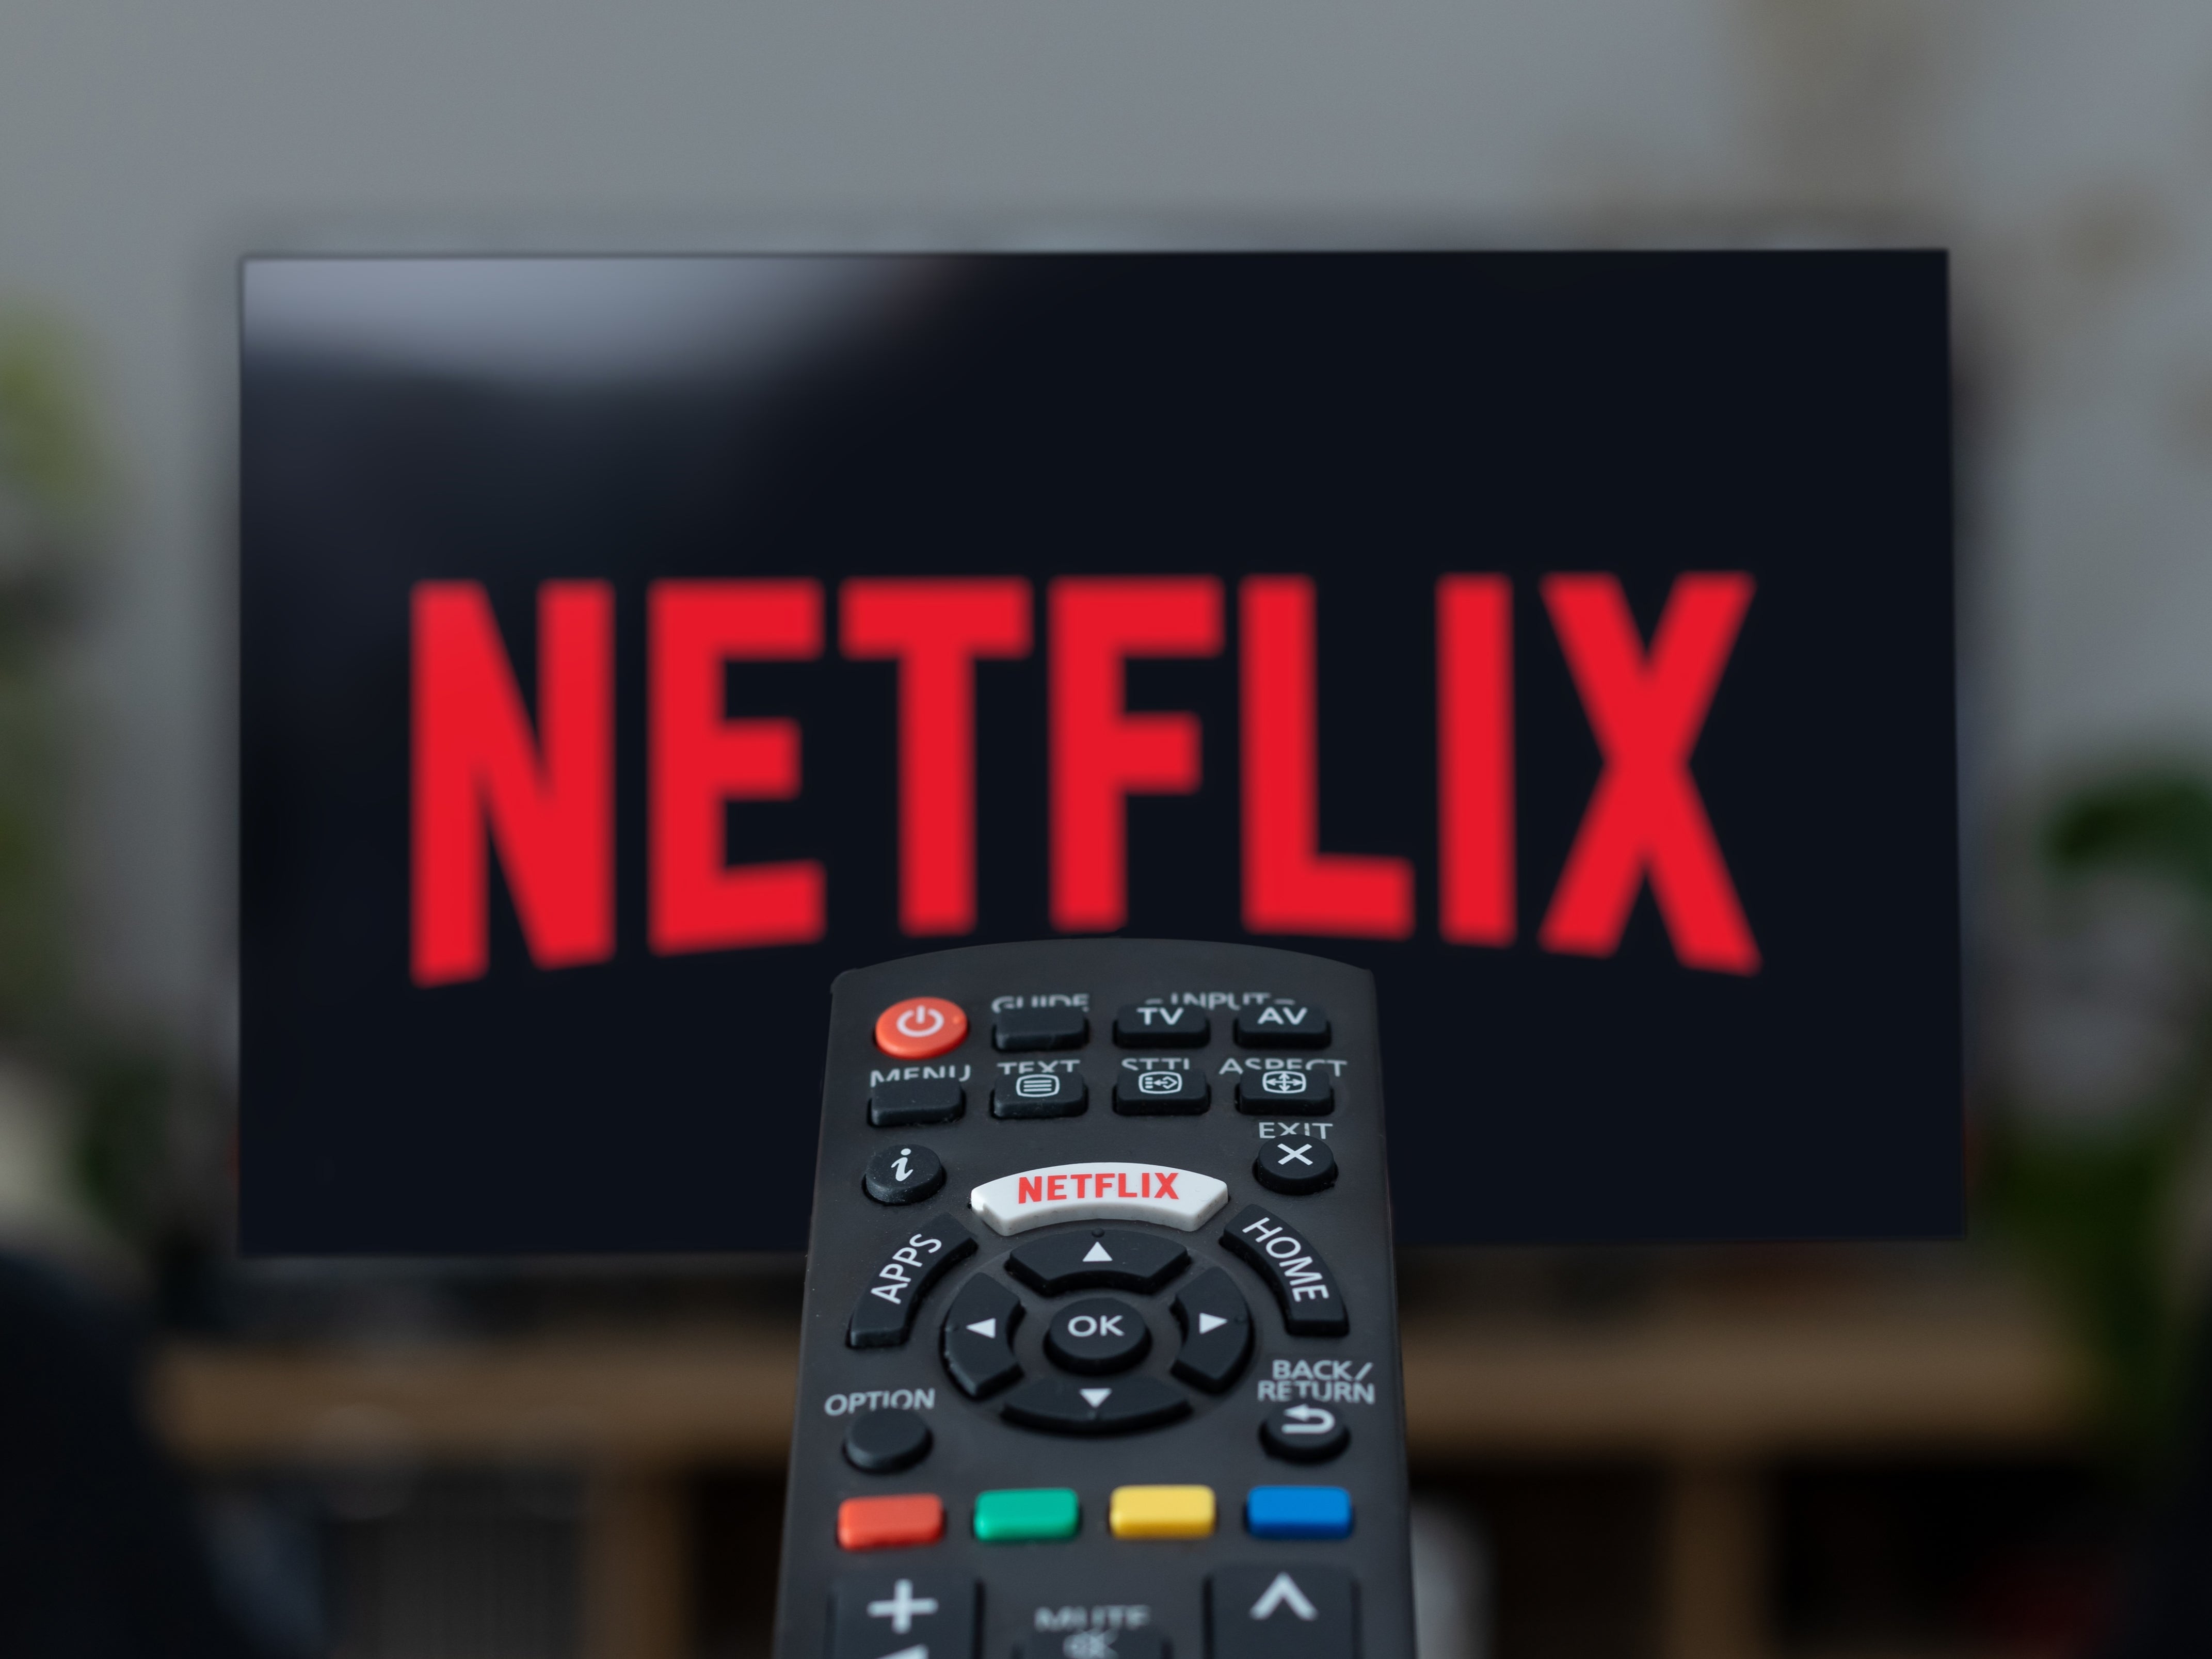 These codes will get you access to hidden Netflix movies and TV shows